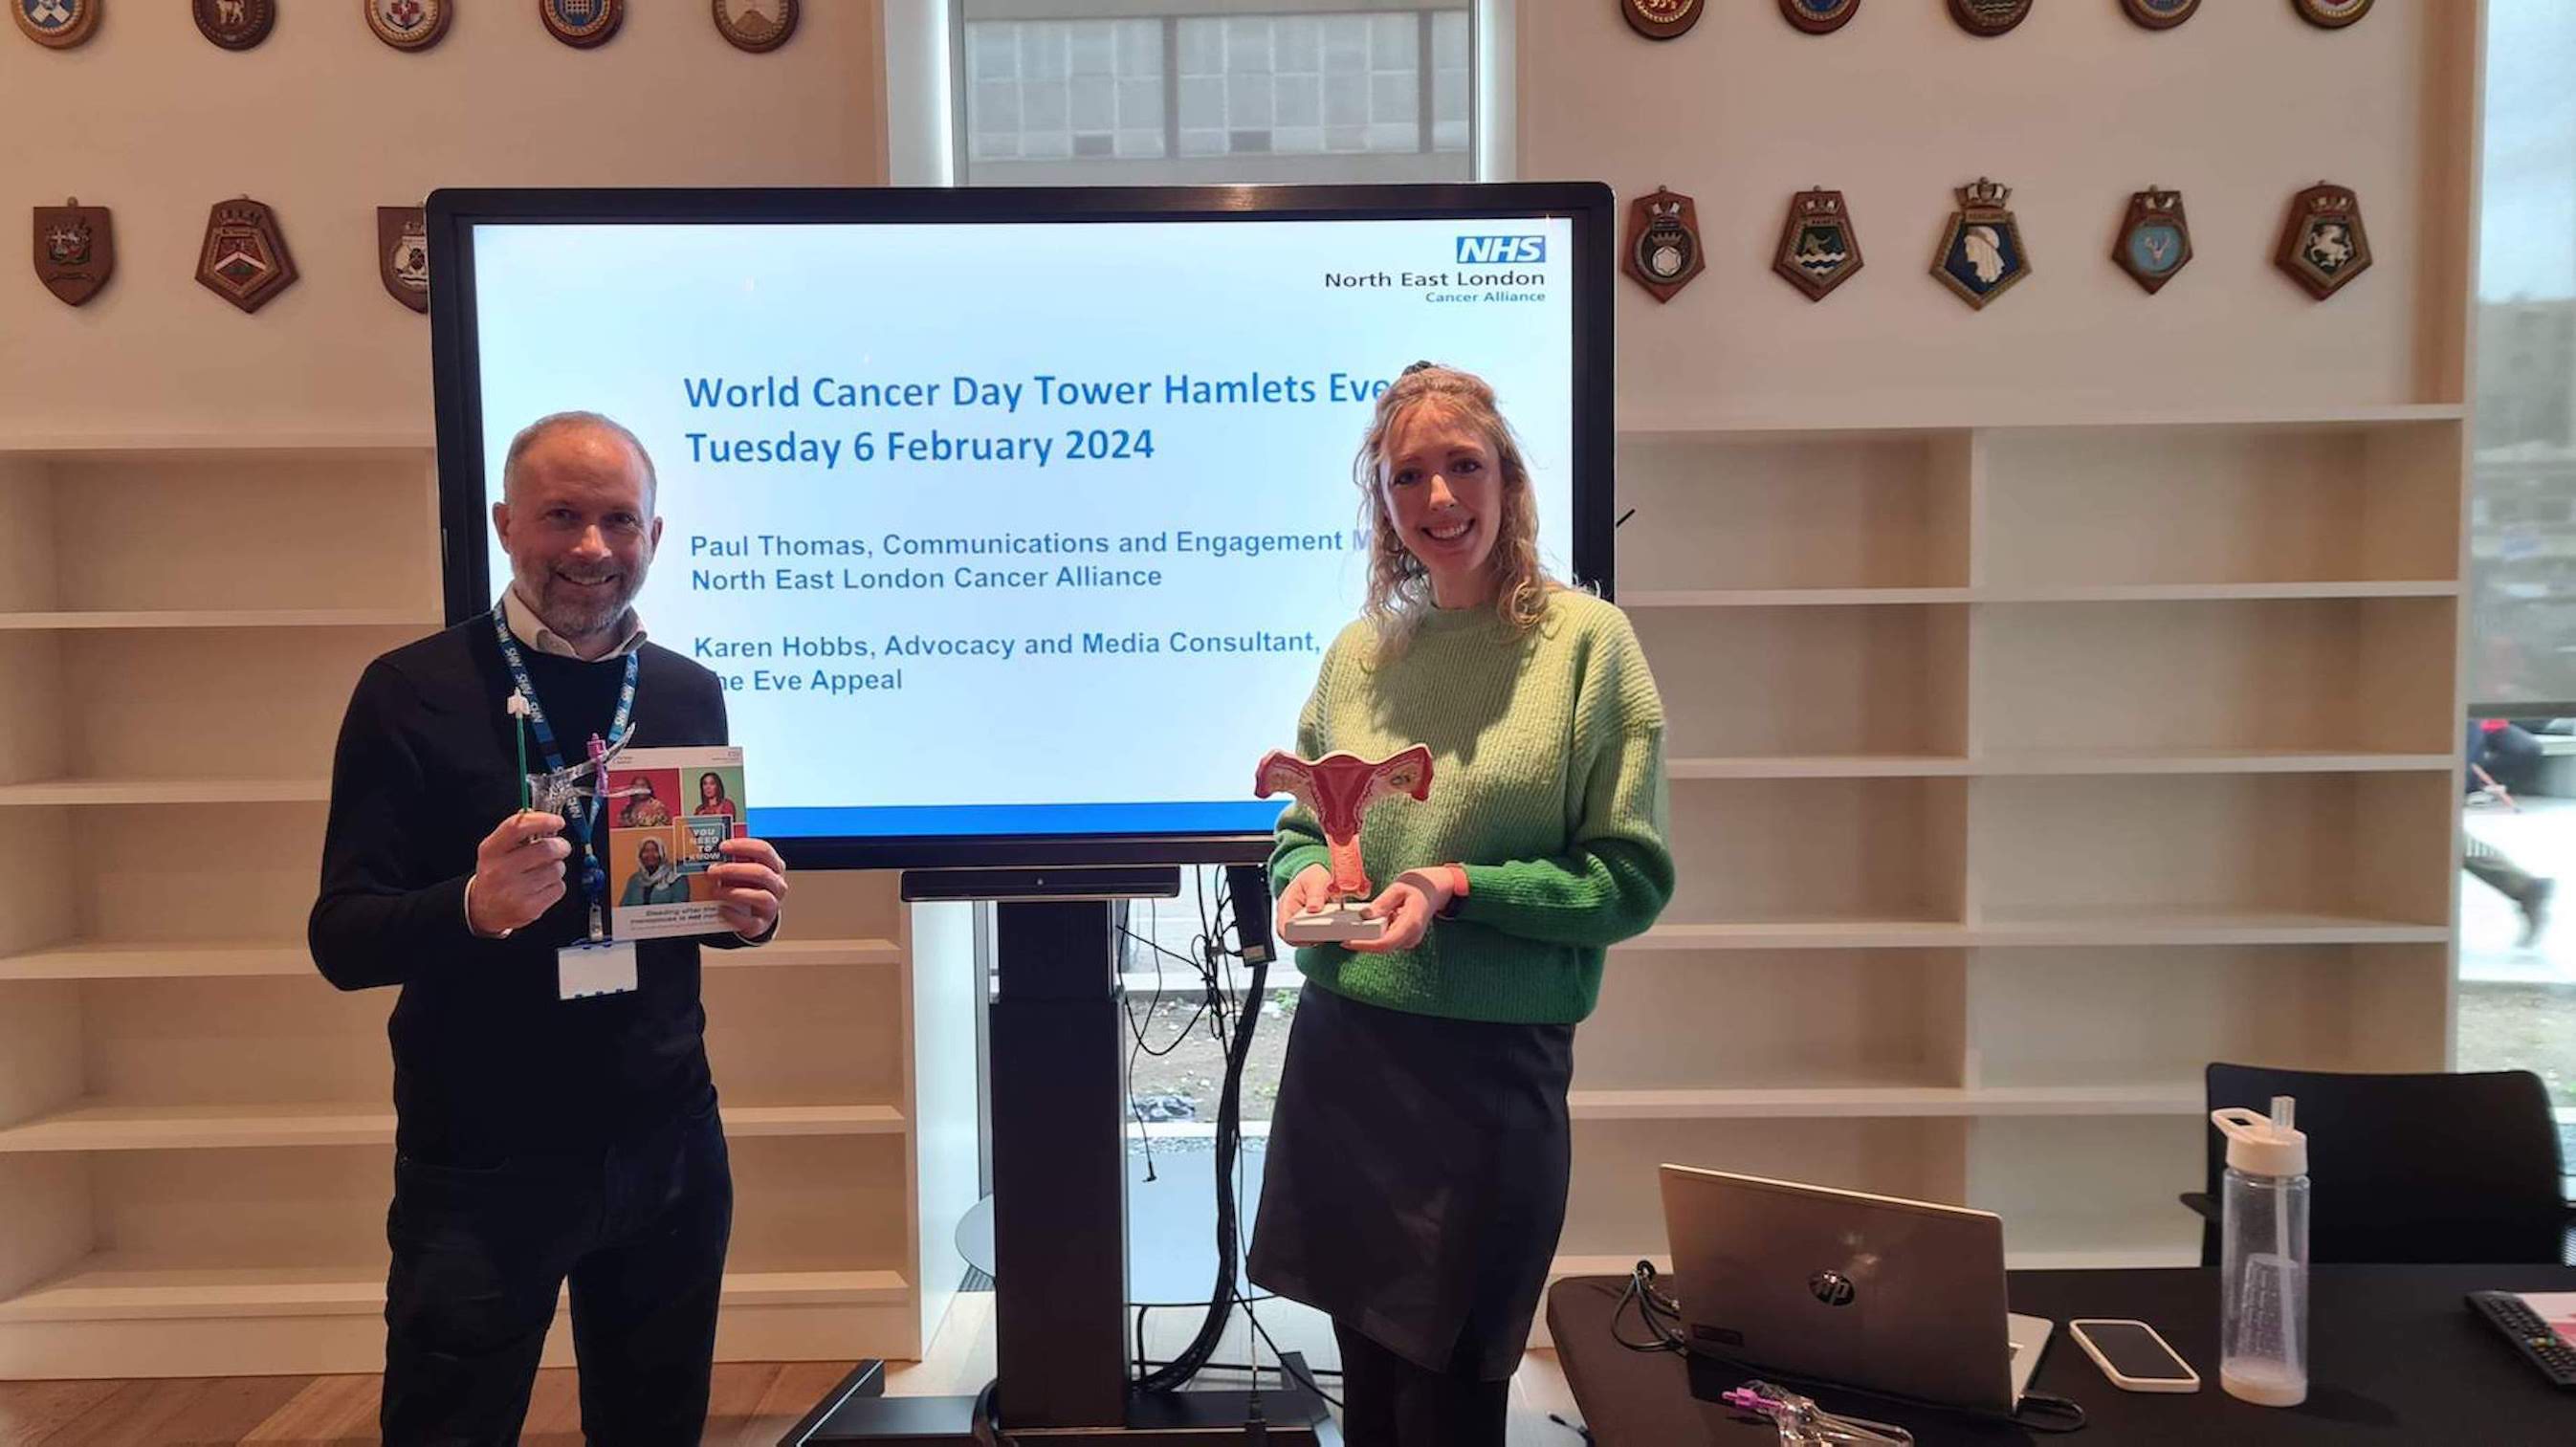 A man and a lady are standing in front of a large TV screen. On the TV screen is a PowerPoint slide which says World Cancer Day Tower Hamlets Event on it. The man and lady are holding information and materials about womb cancer and cervical screening